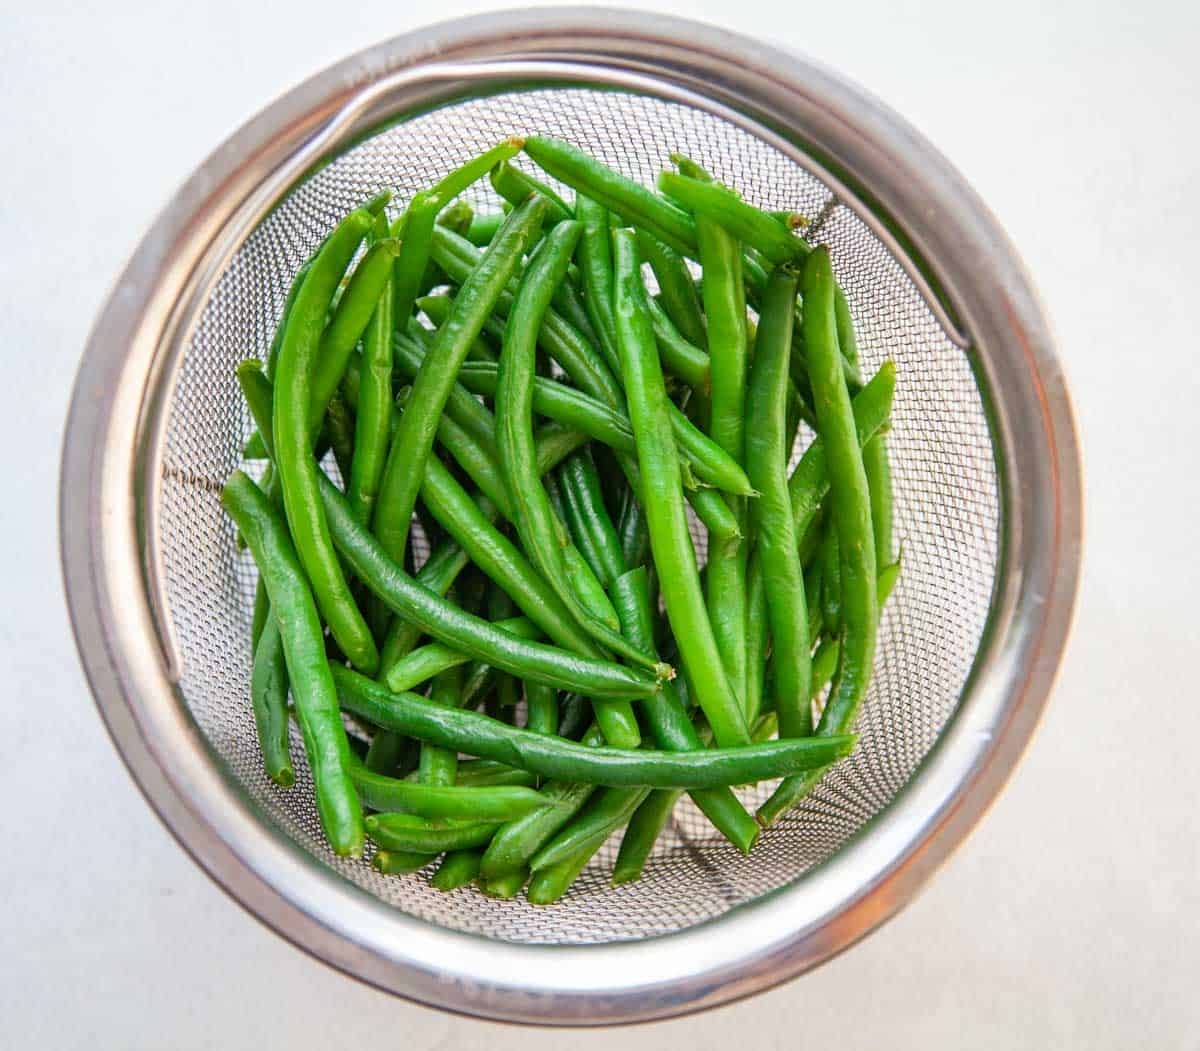 steamed green beans in and Instant Pot steamer basket